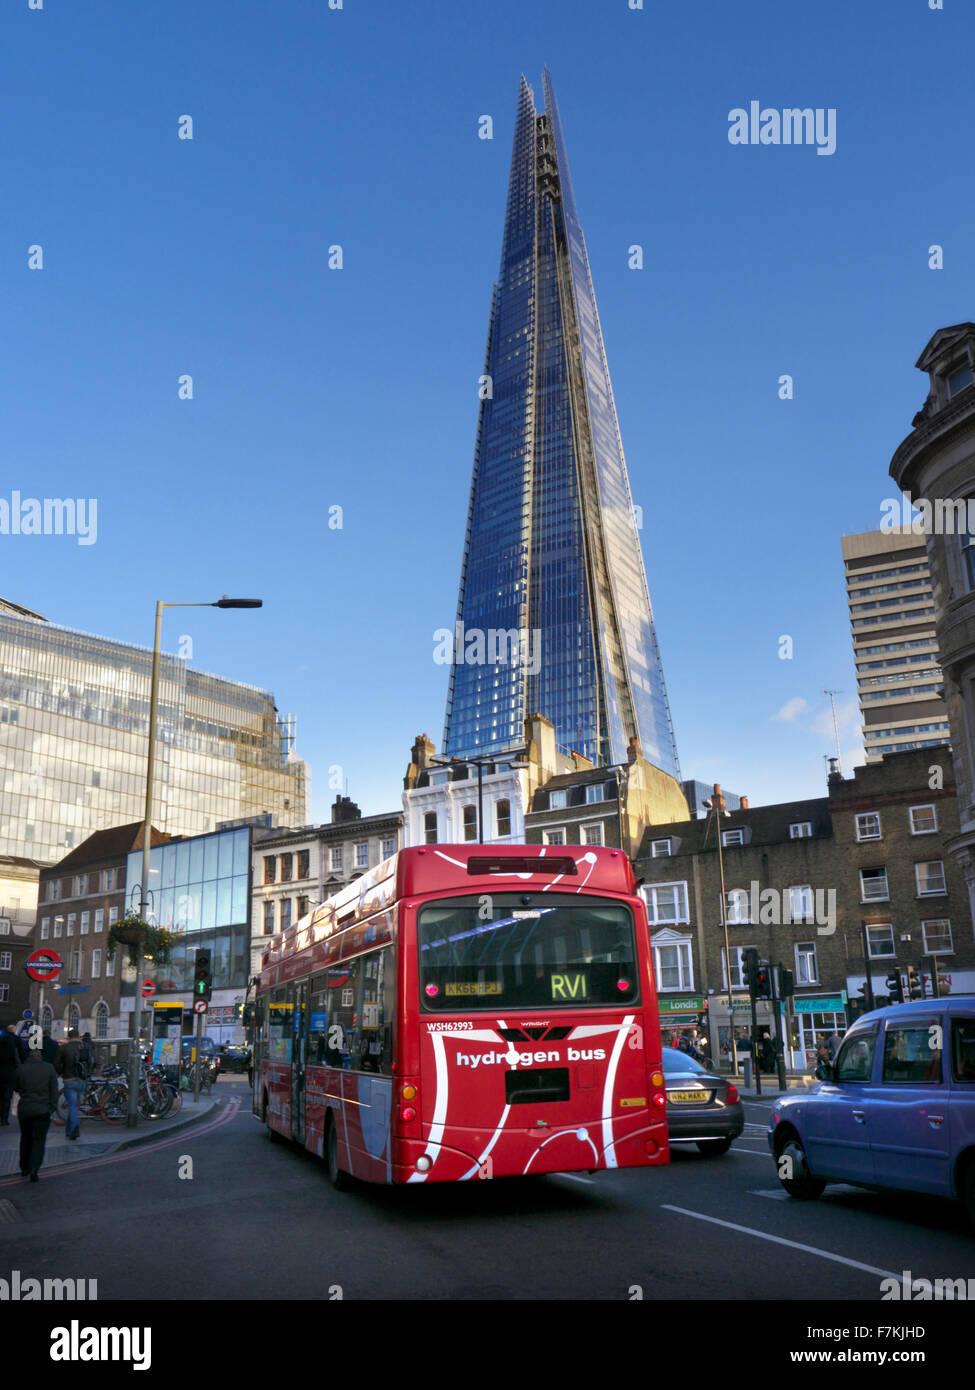 HYDROGEN LONDON BUS with The London Shard with new clean technology hydrogen powered red London bus in foreground  London UK Stock Photo